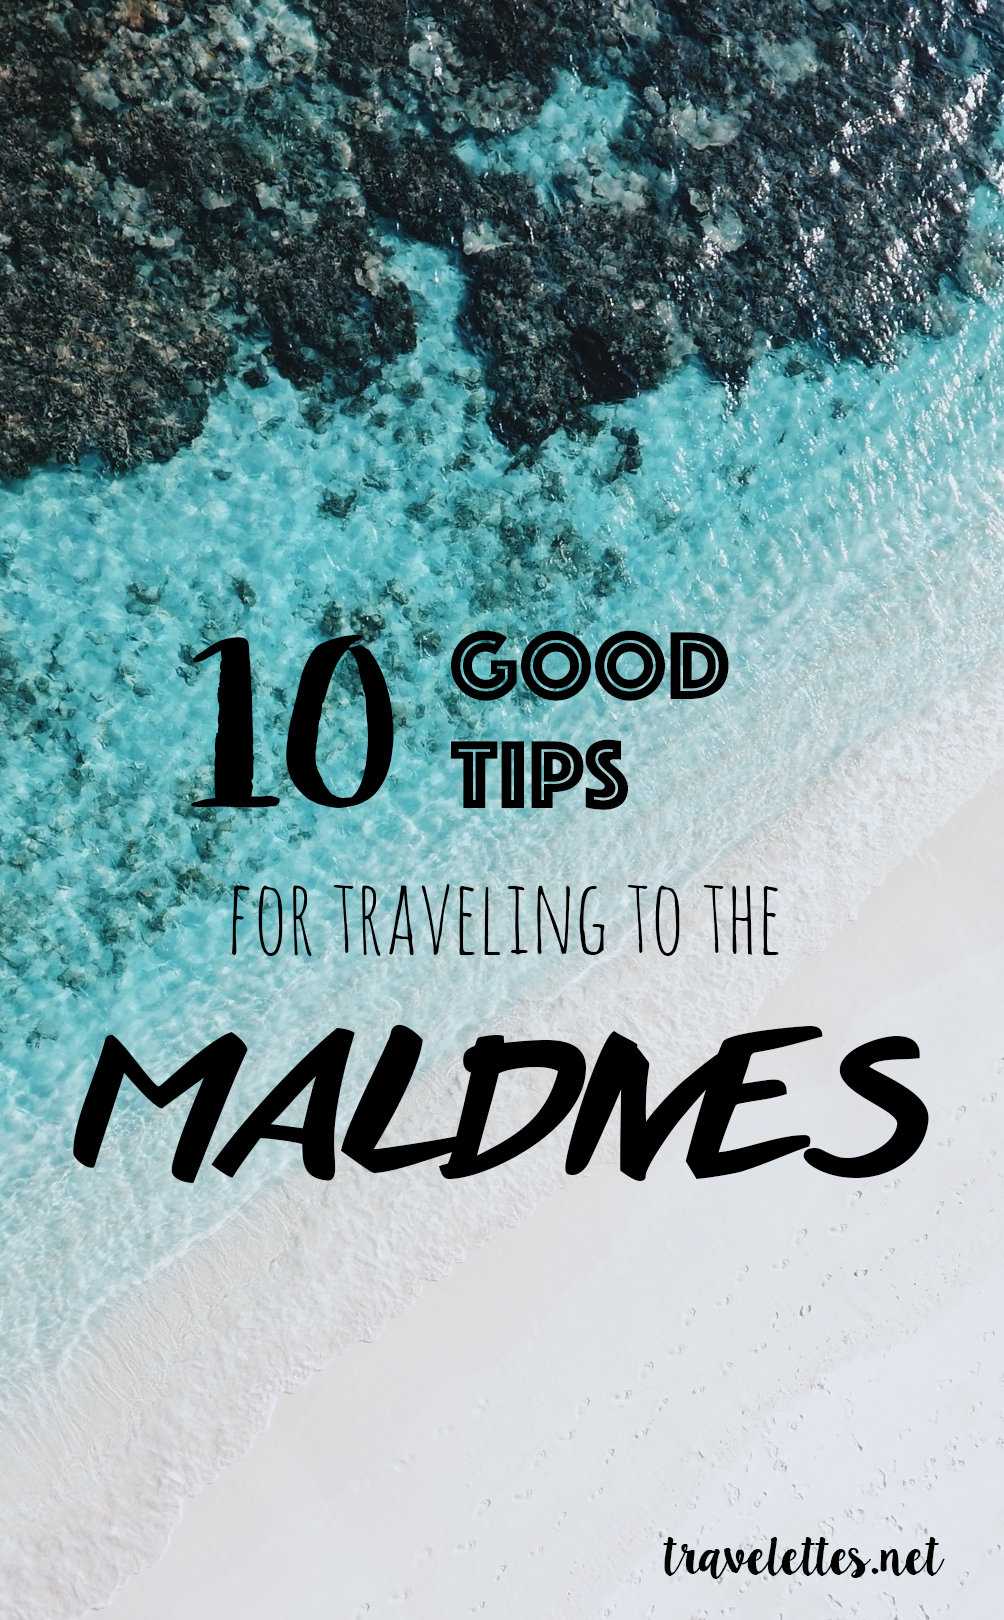 10 good tips for traveling to the Maldives